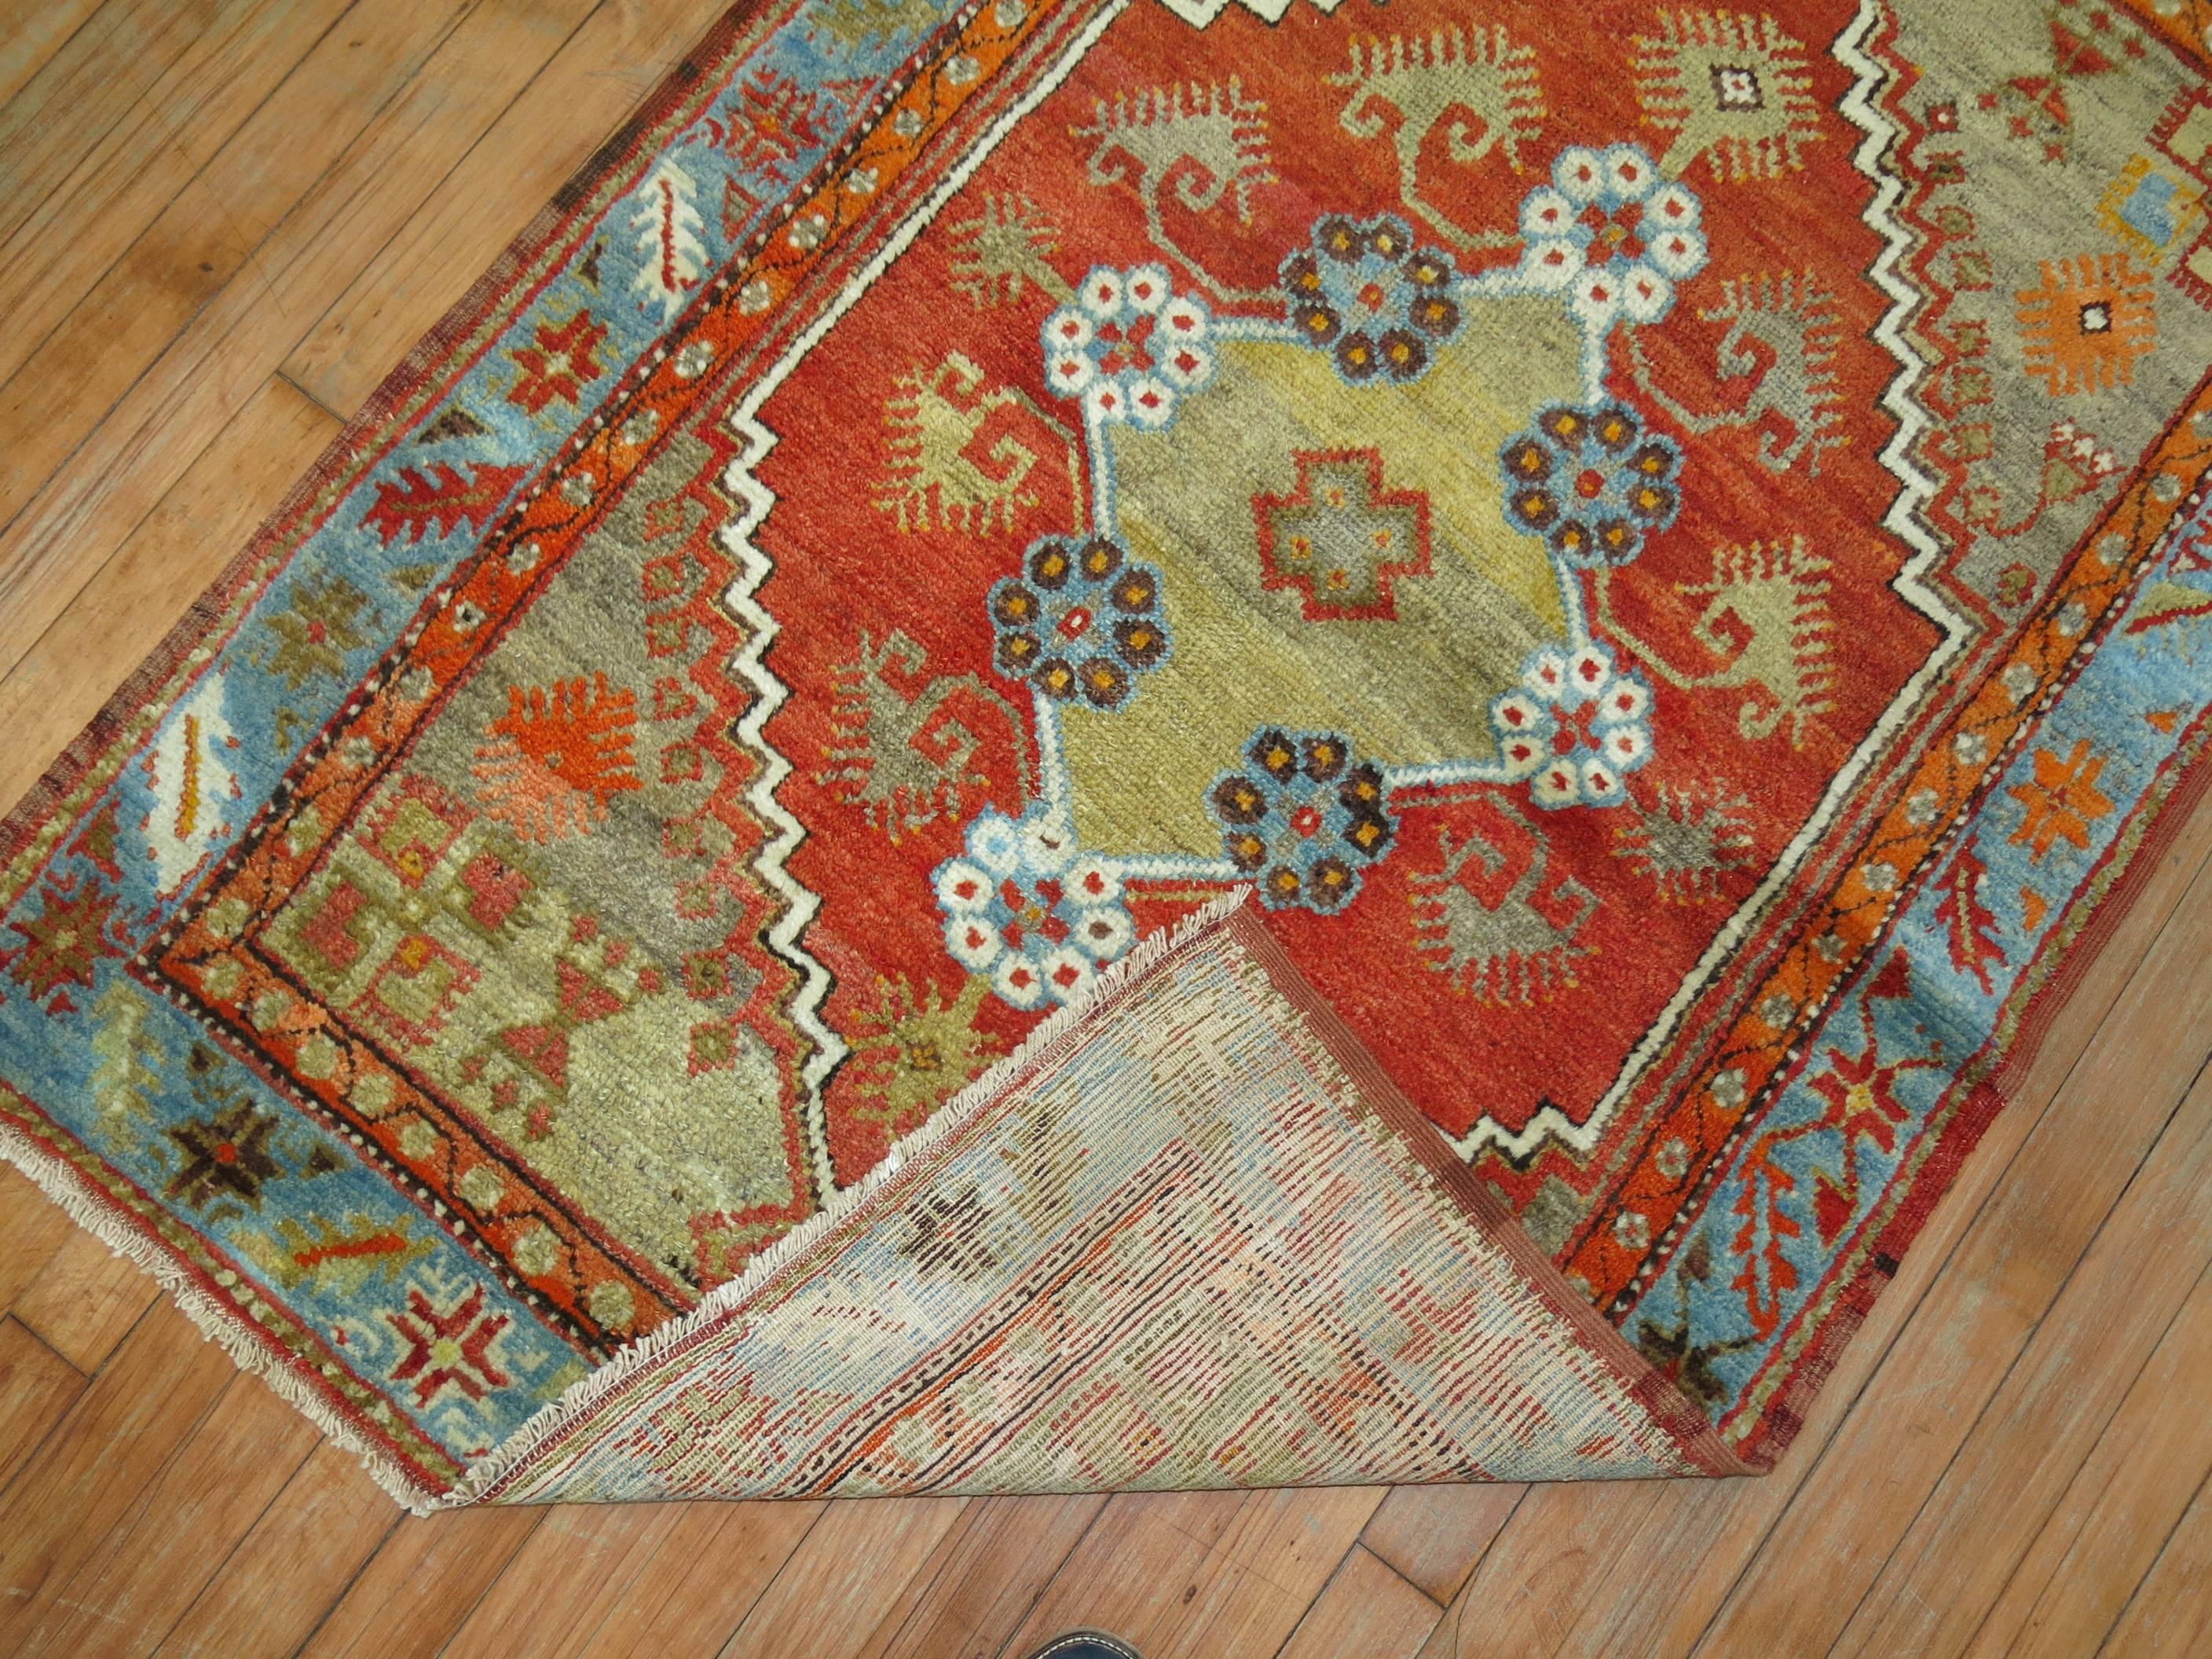 A colorful one of a kind scatter size antique Turkish Oushak rug.